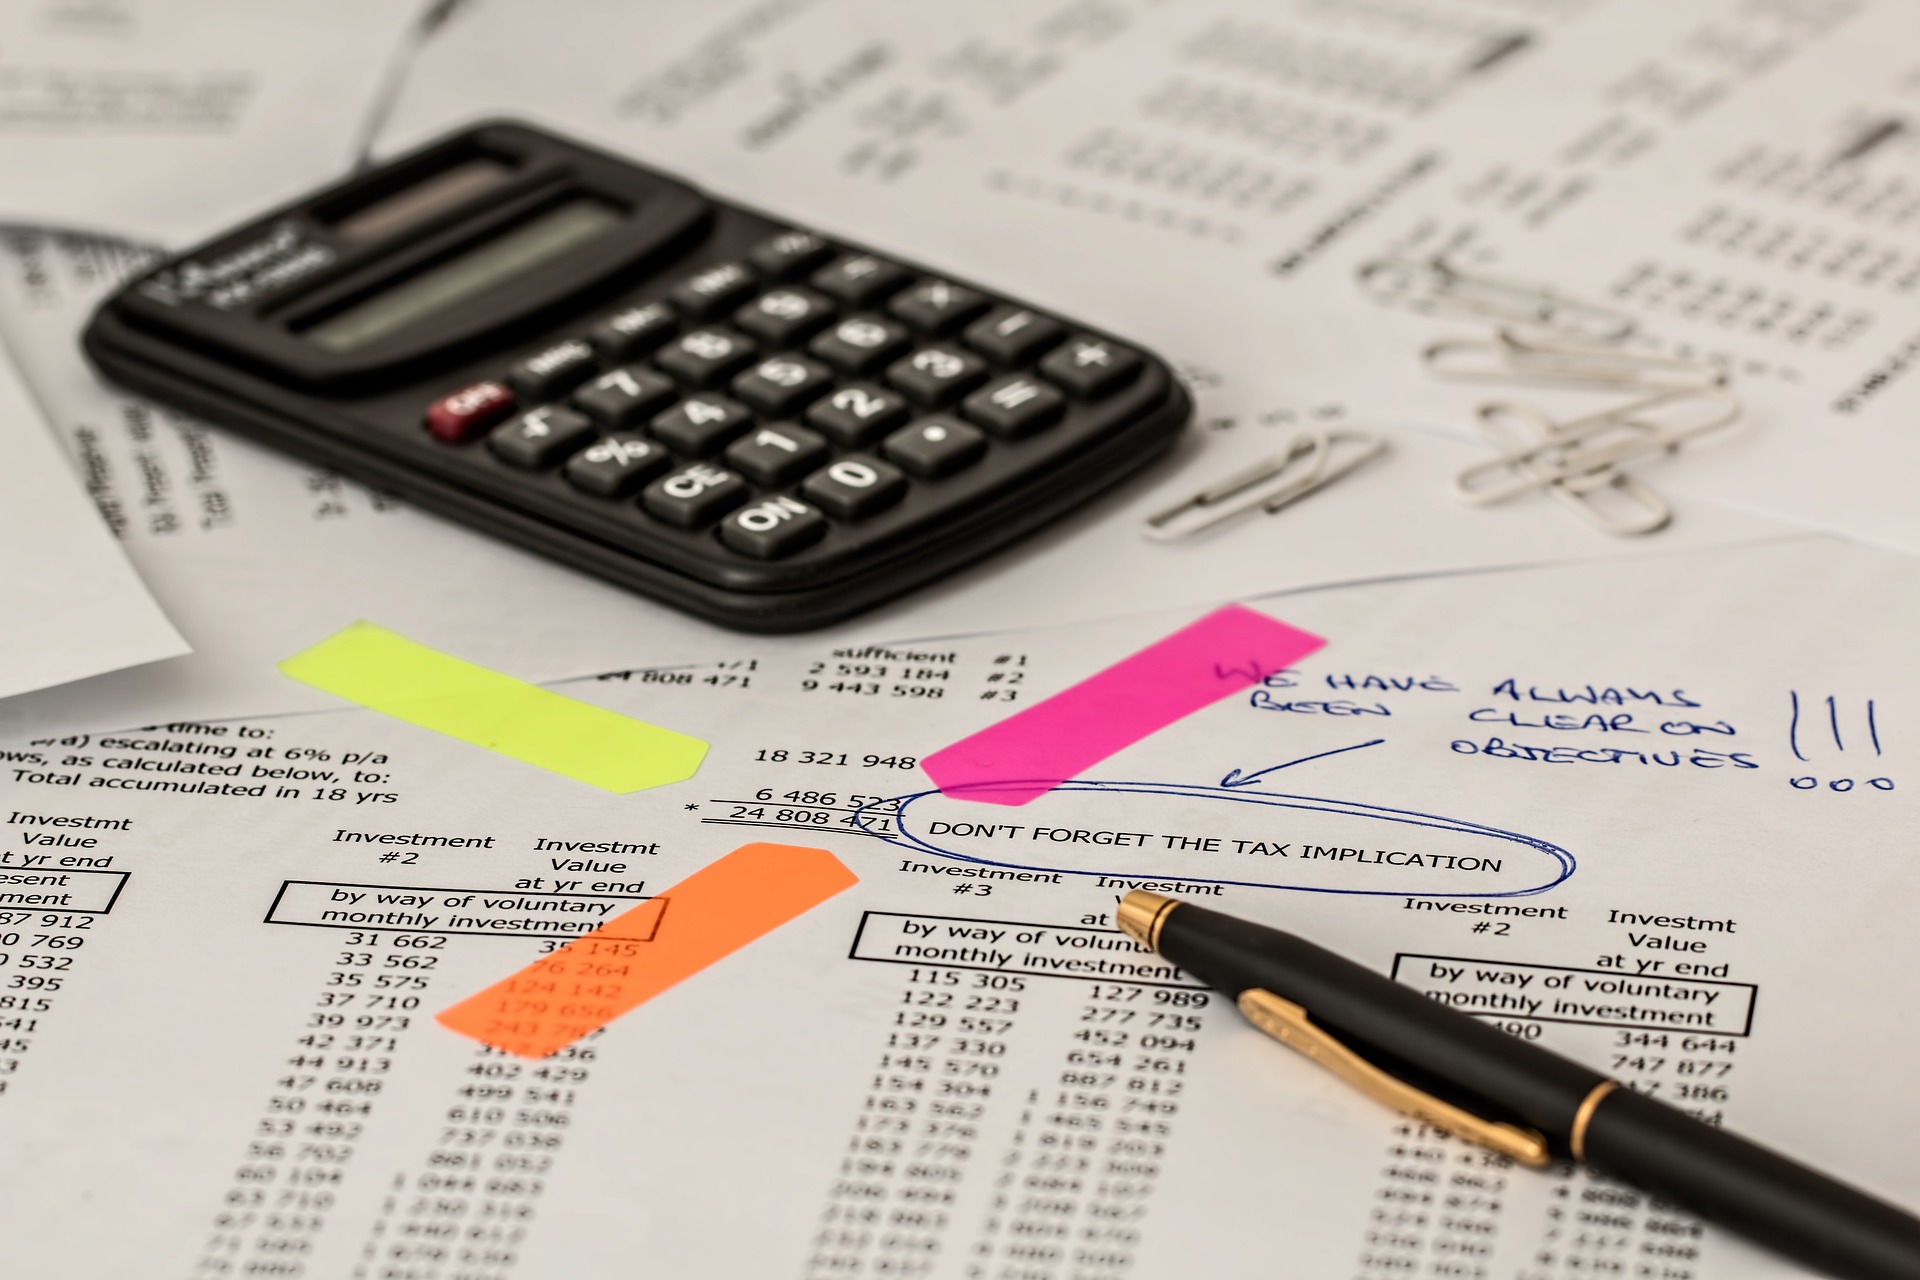 A close-up view of a desk covered with financial documents, a calculator, and a pen, highlighted with colorful markers emphasizing key figures and notes.